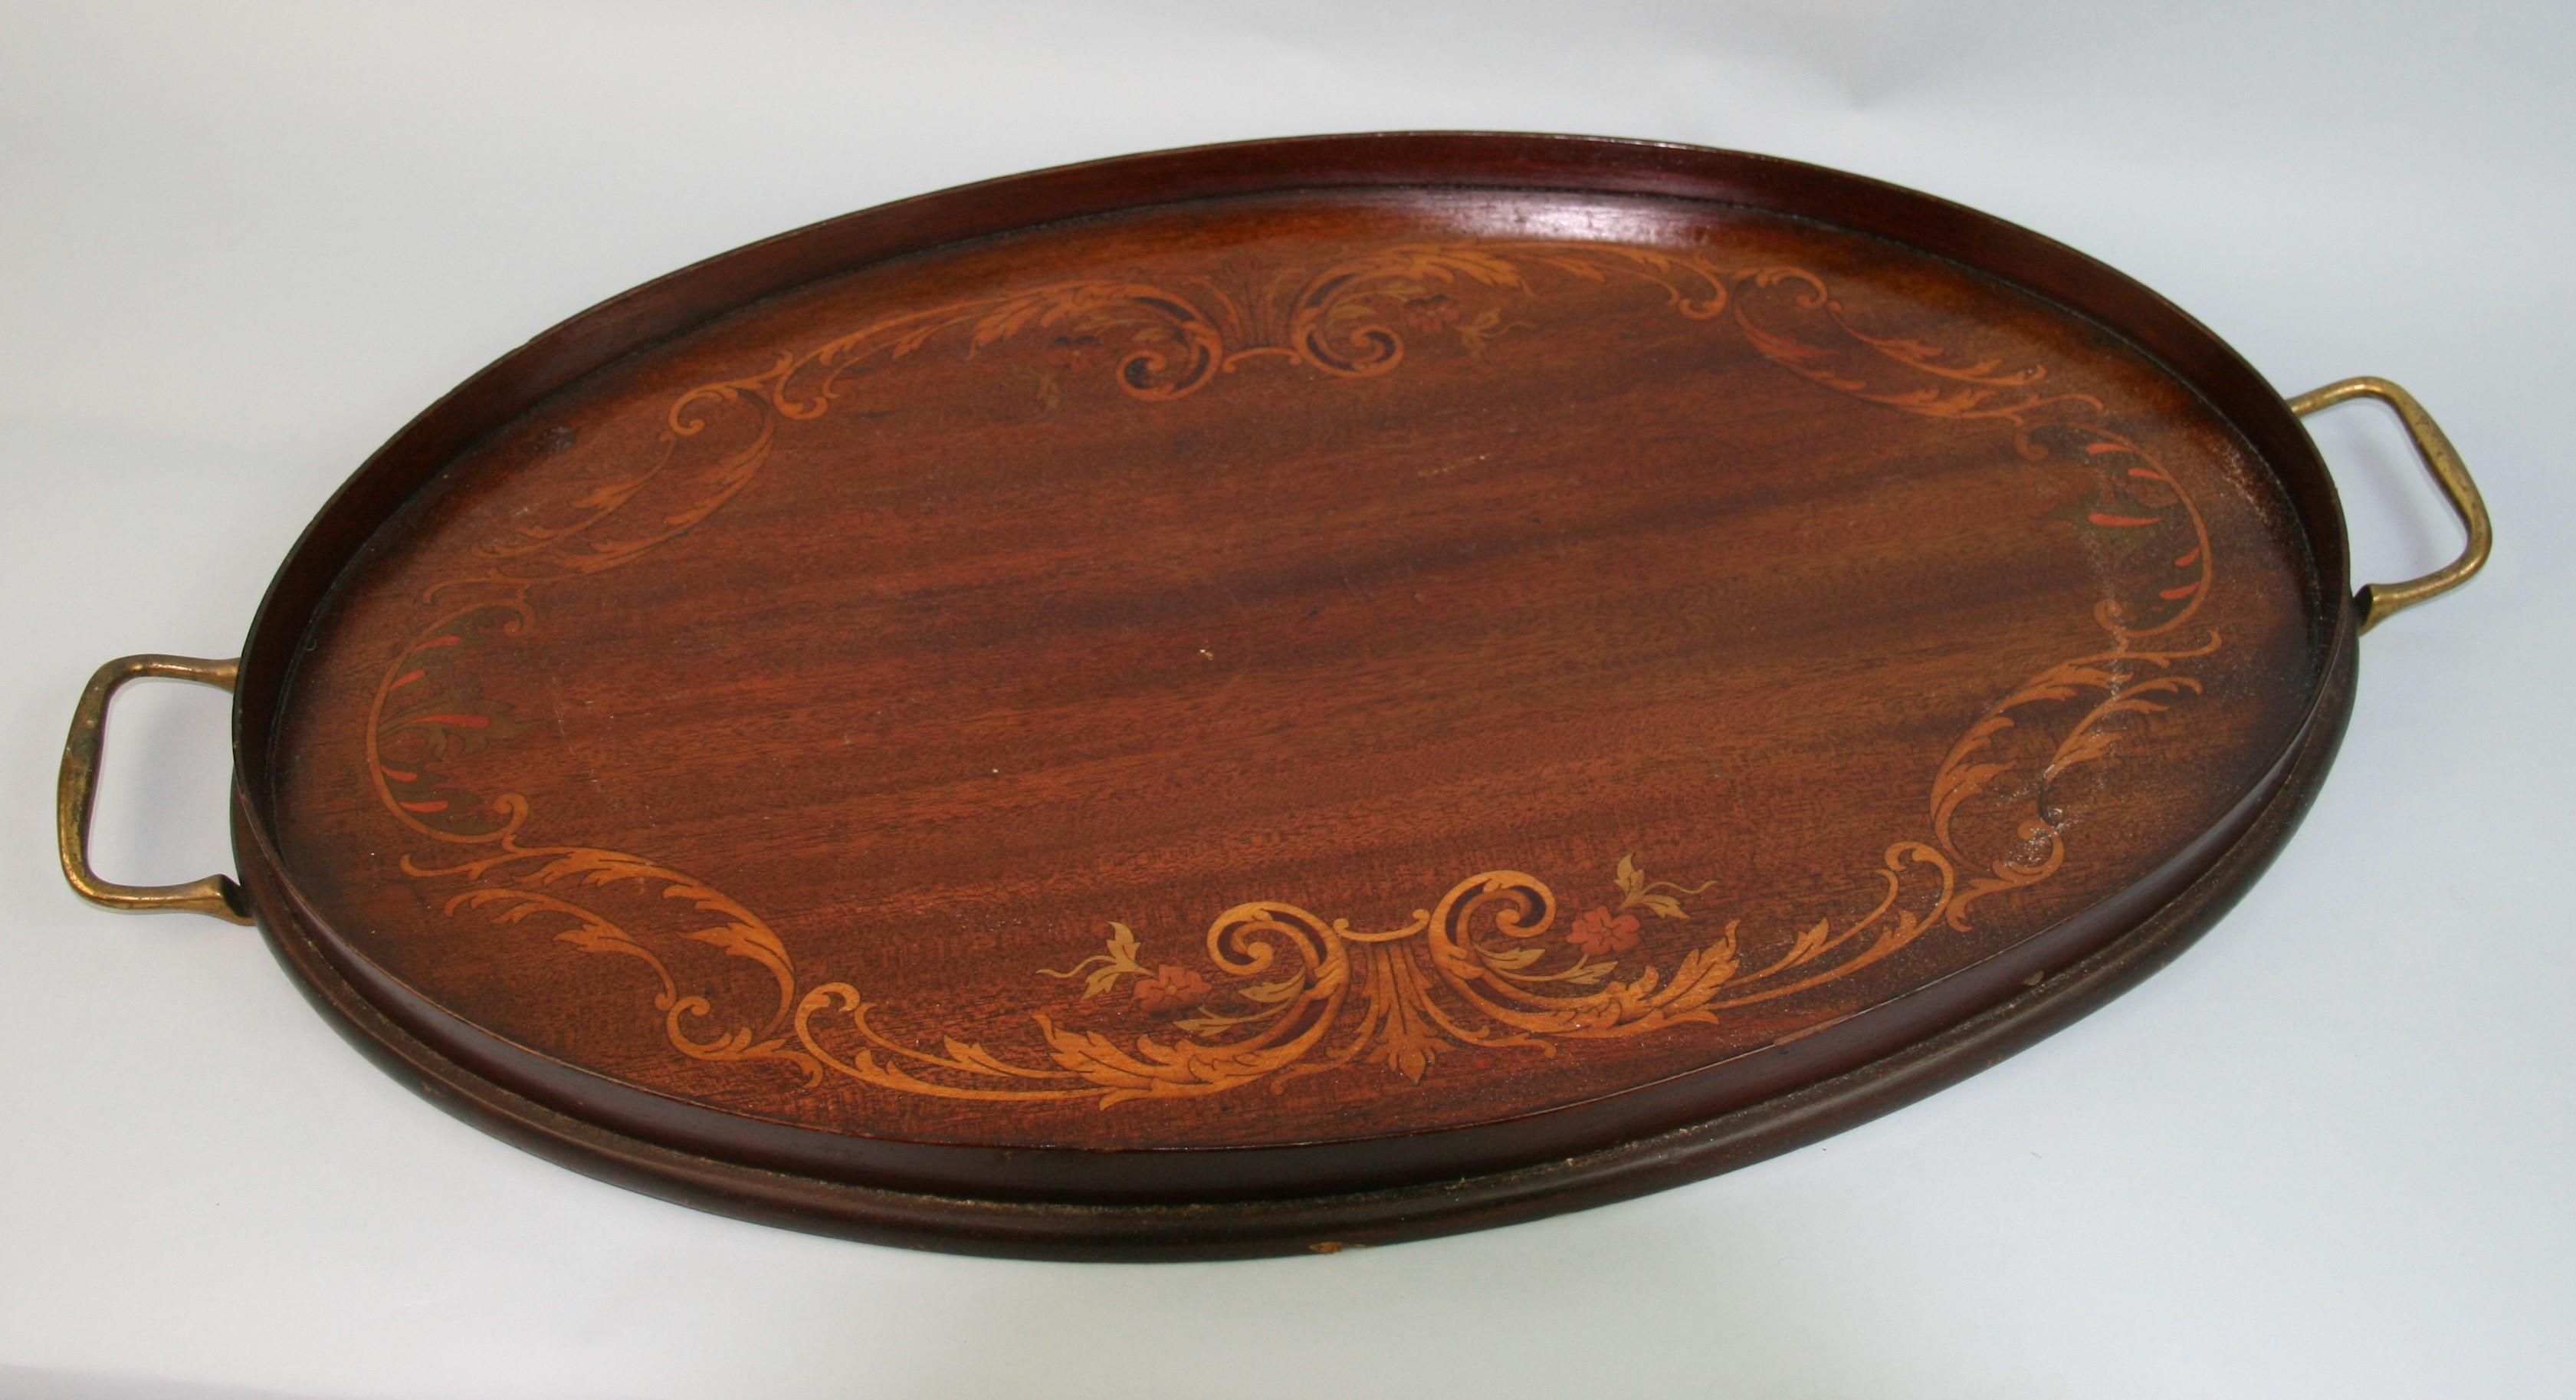 3-1138 Antique Edwardian  English  oval serving tray with brass handles.
Saddle wood marquetry.